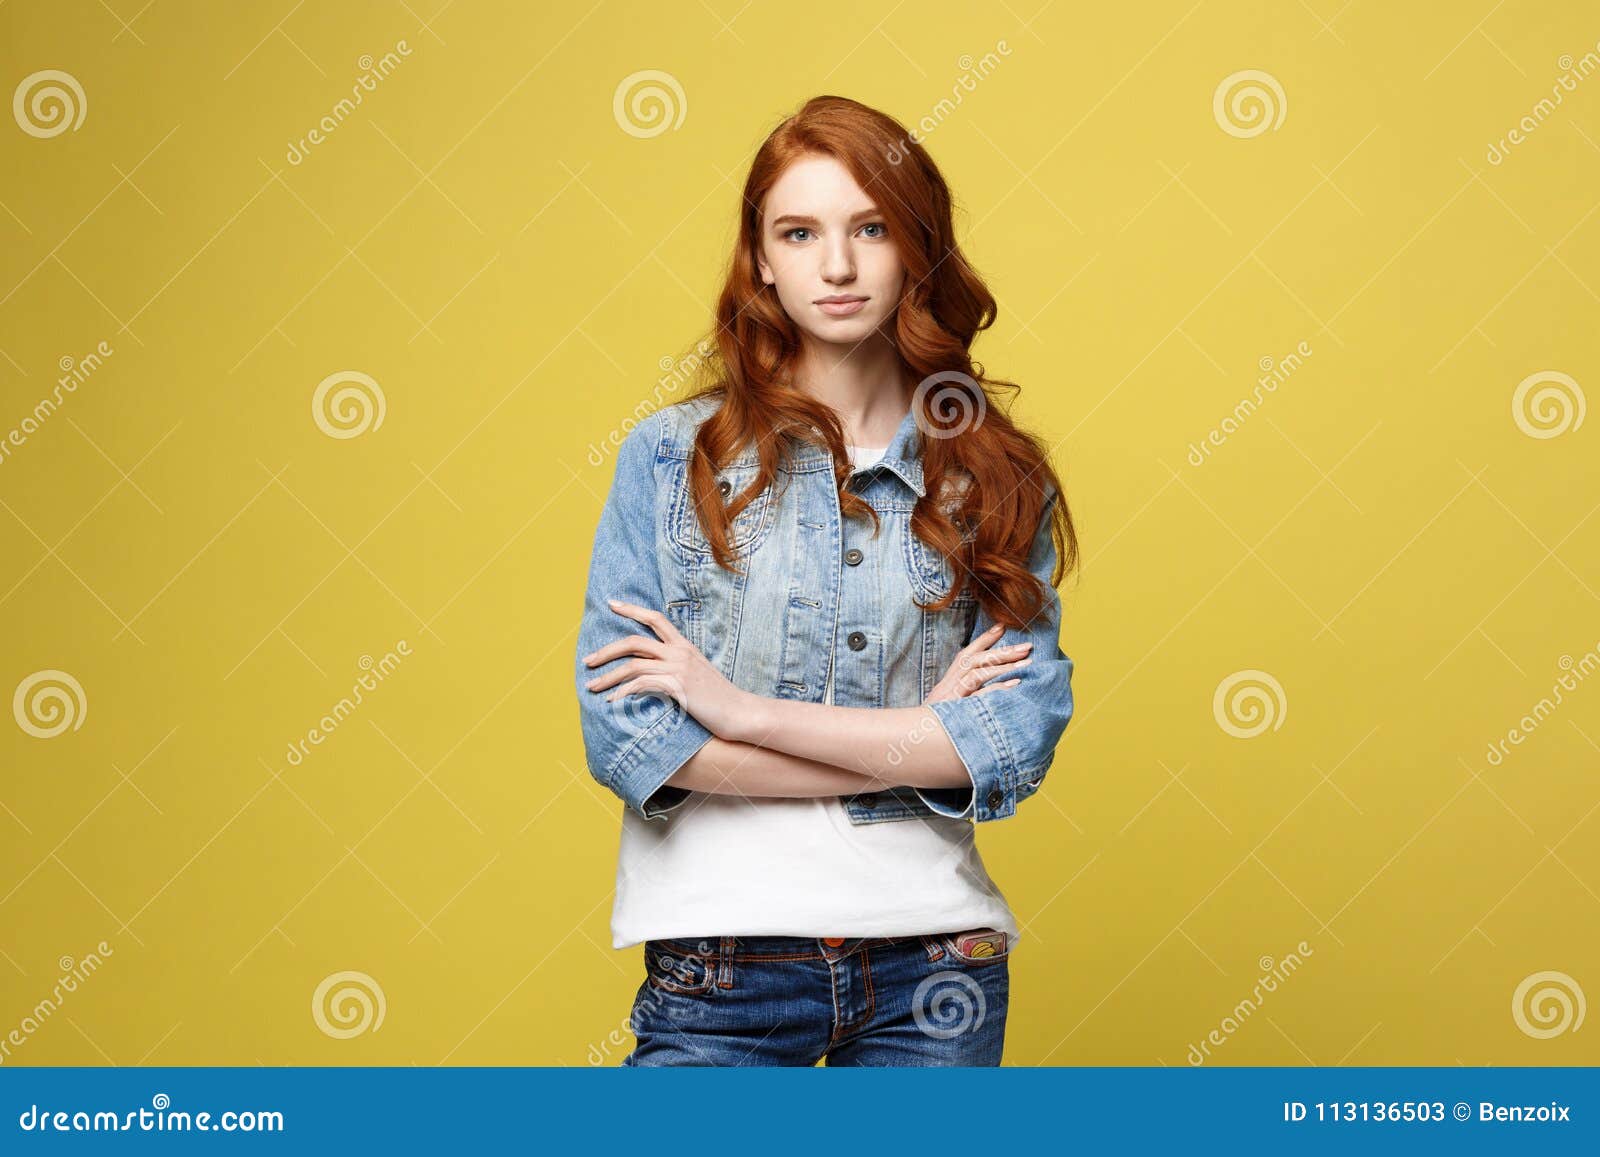 Lifestyle Concept: Young Caucasian Beautiful Woman in Denim Jacket ...